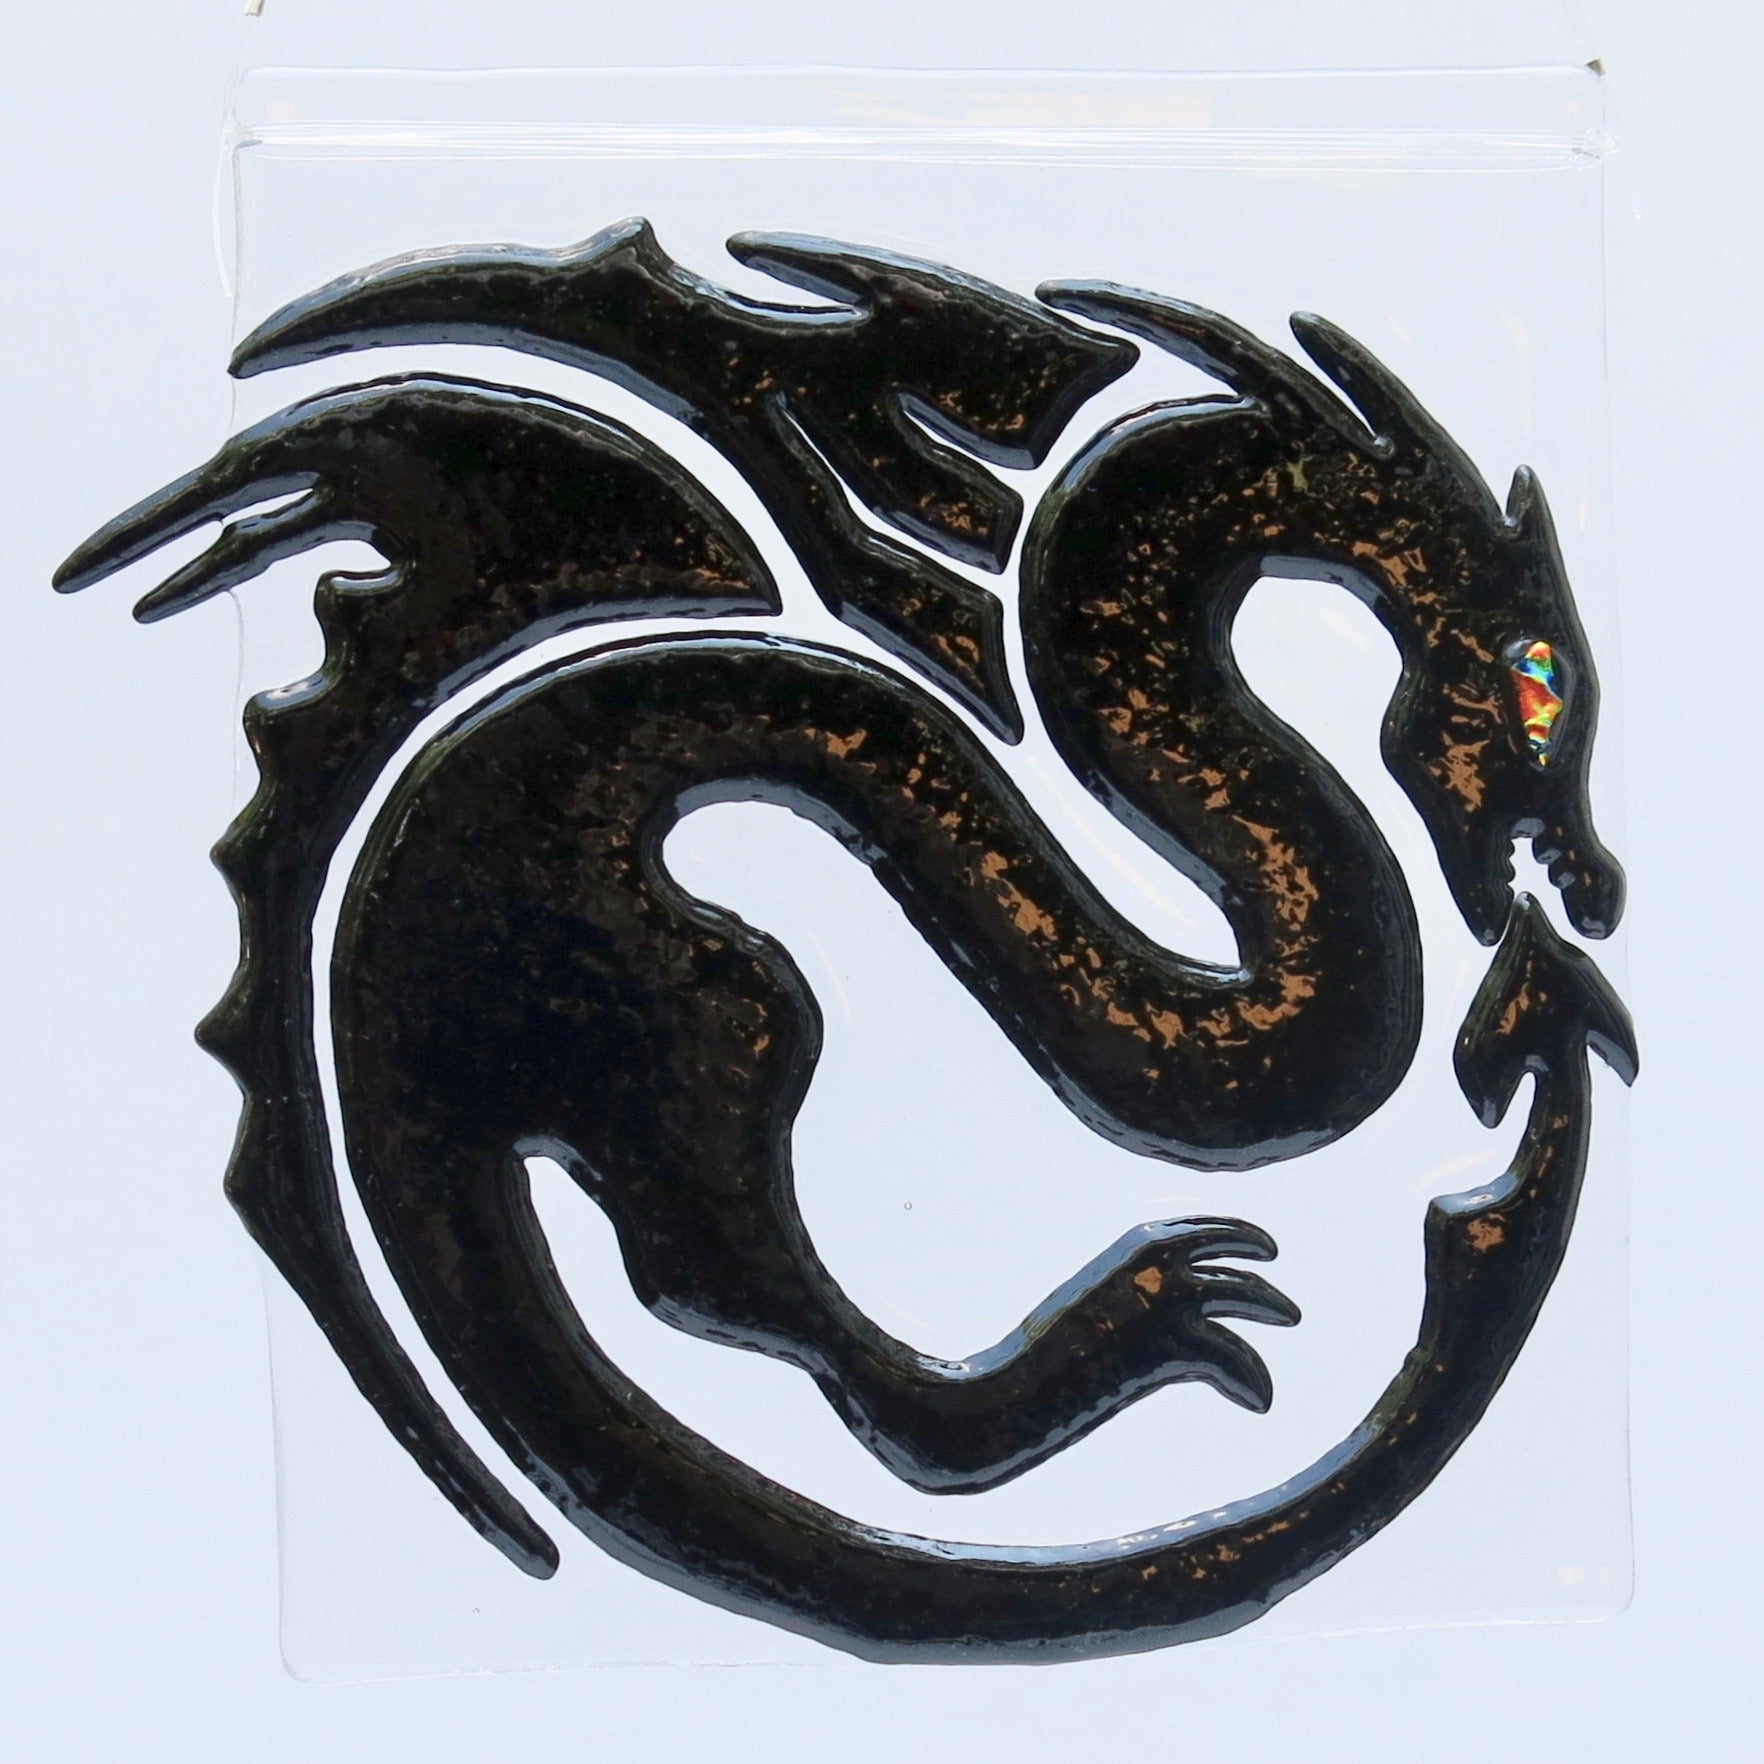 This fused glass black dragon has a dichroic eye and measures 7" x 7" (18 cm x 18 cm)